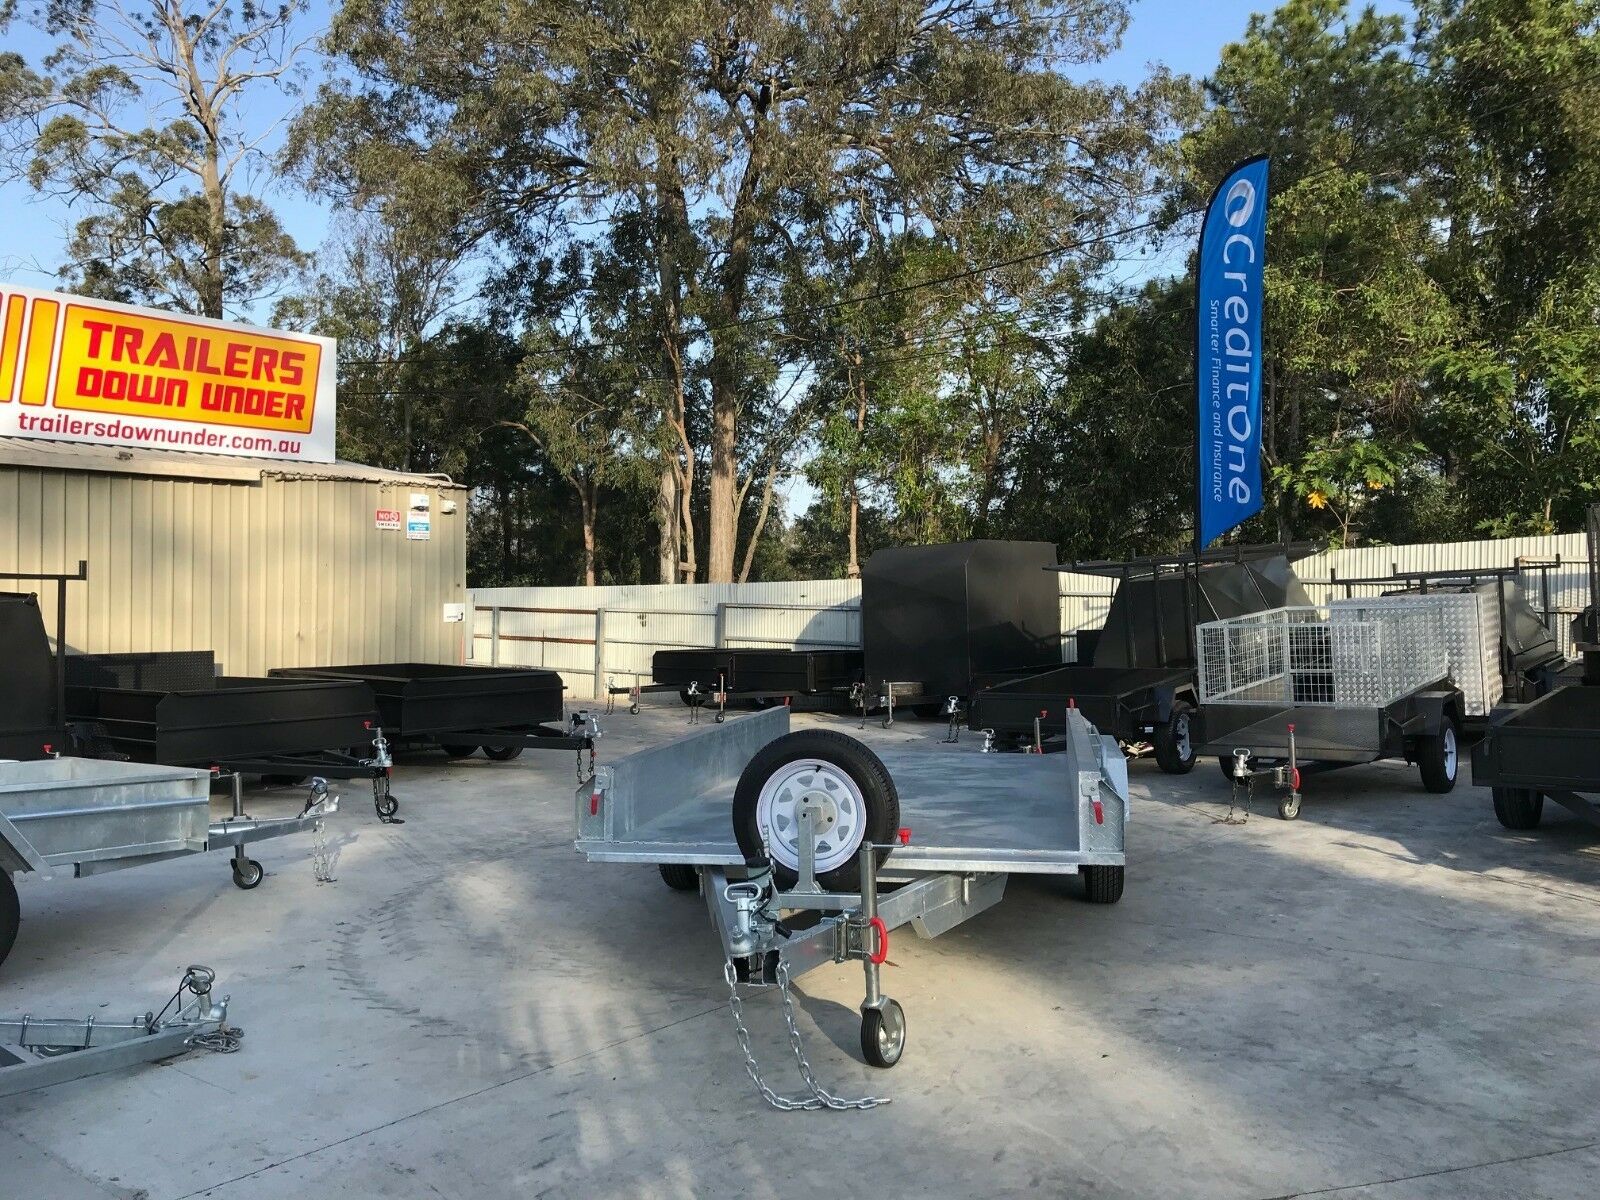 12×6 Tandem Galvanised Box Trailer For Sale Full Checker Plate – Trailer for Sale Brisbane<br><br><span class="galv-import">Imported Trailer</span>